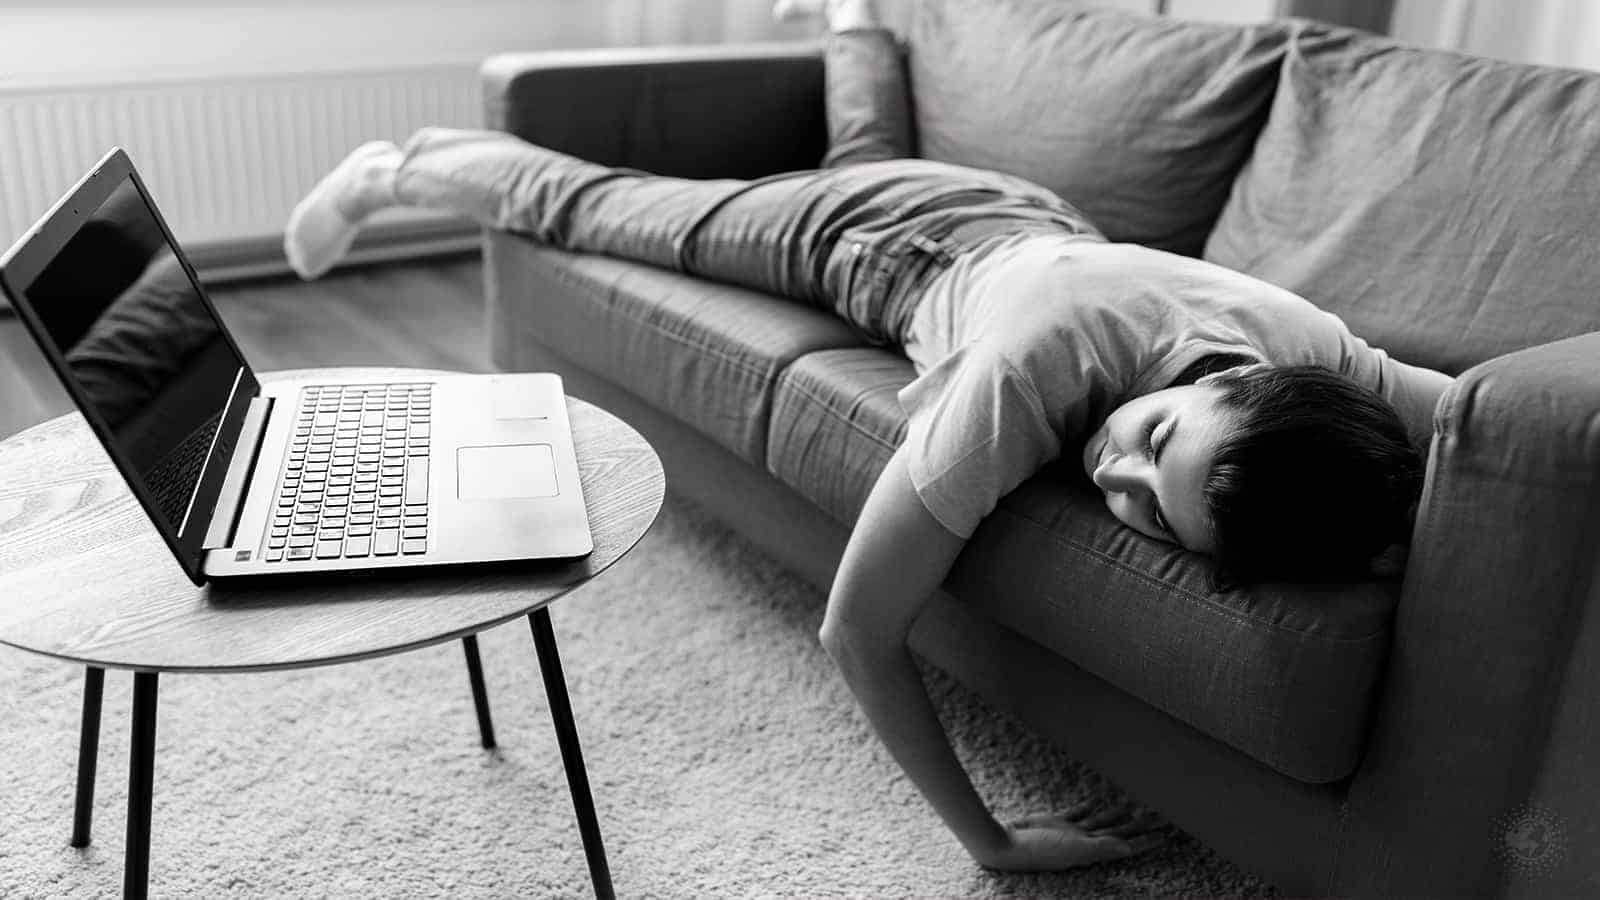 10 Things That Cause You to Feel Sluggish (And How to Fix It)